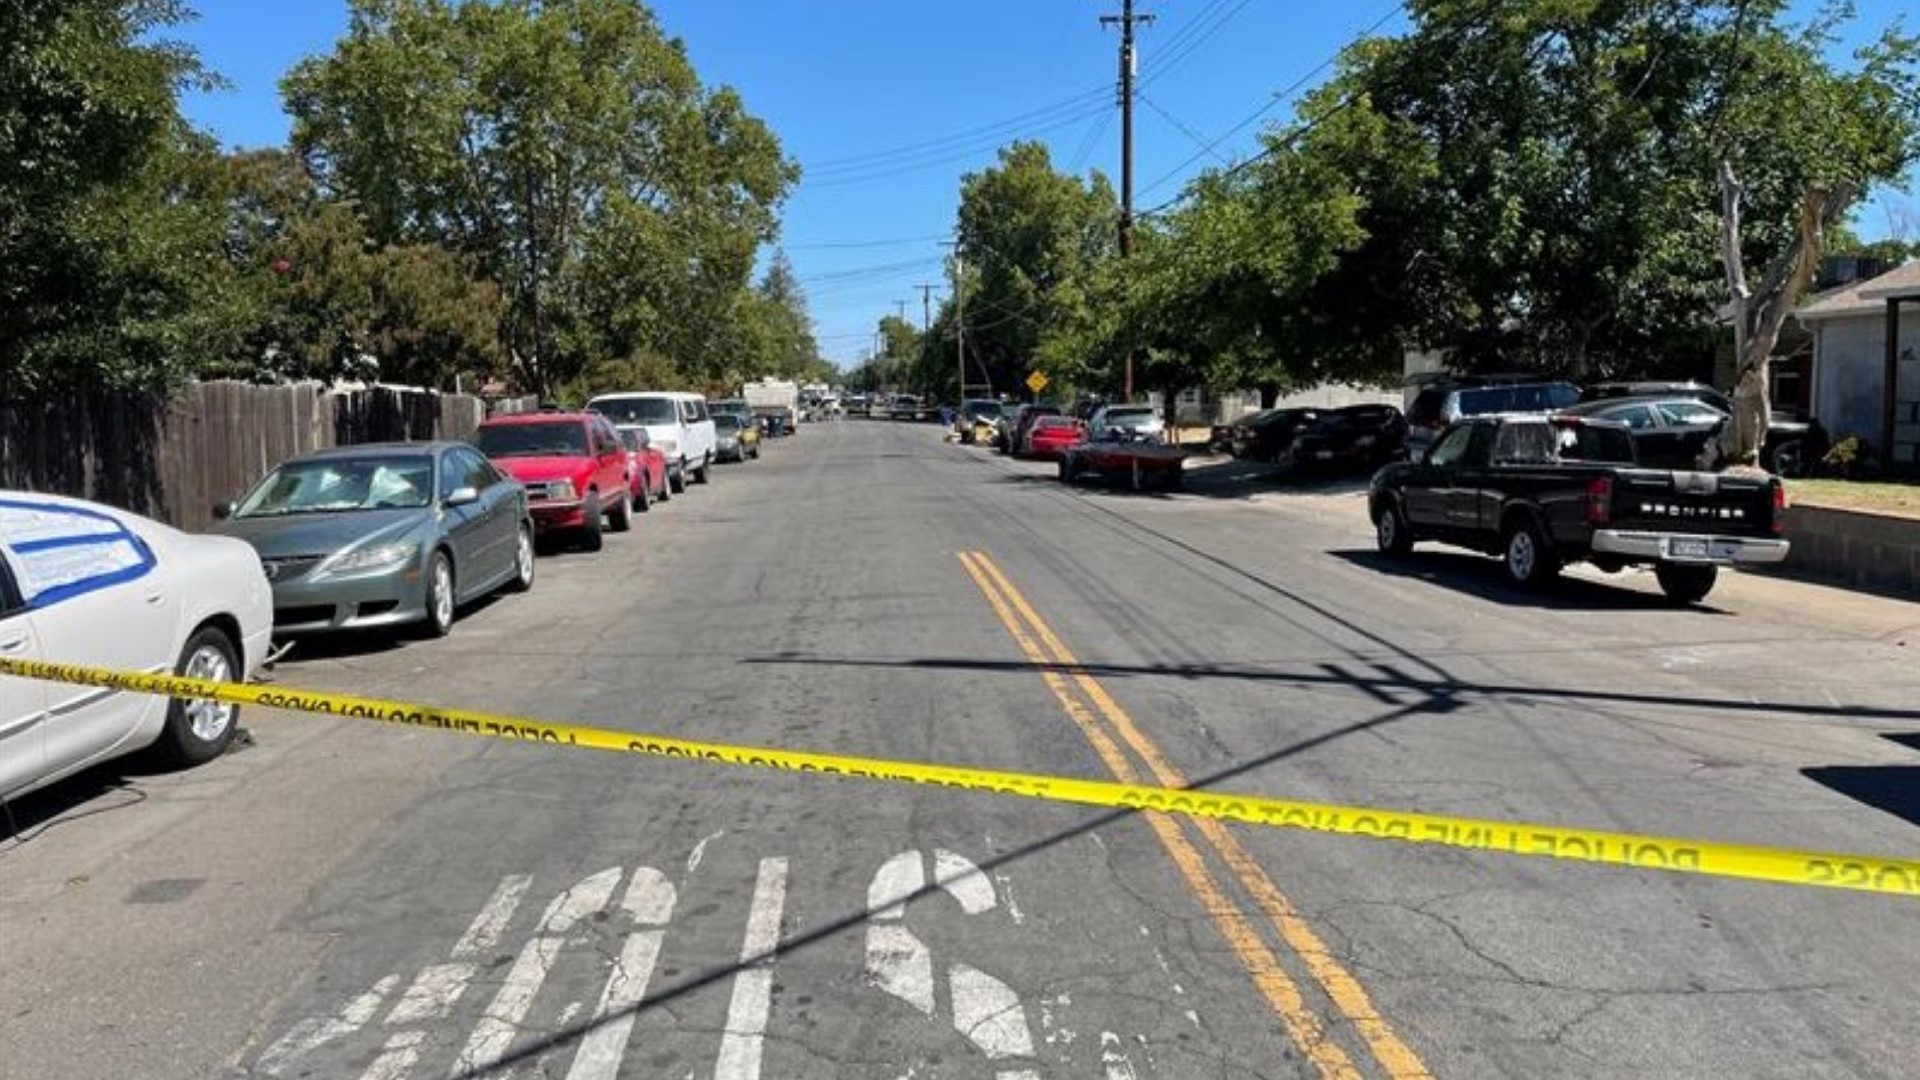 A man has died after a Sunday morning shooting in the South Hagginwood neighborhood of Sacramento, police say.